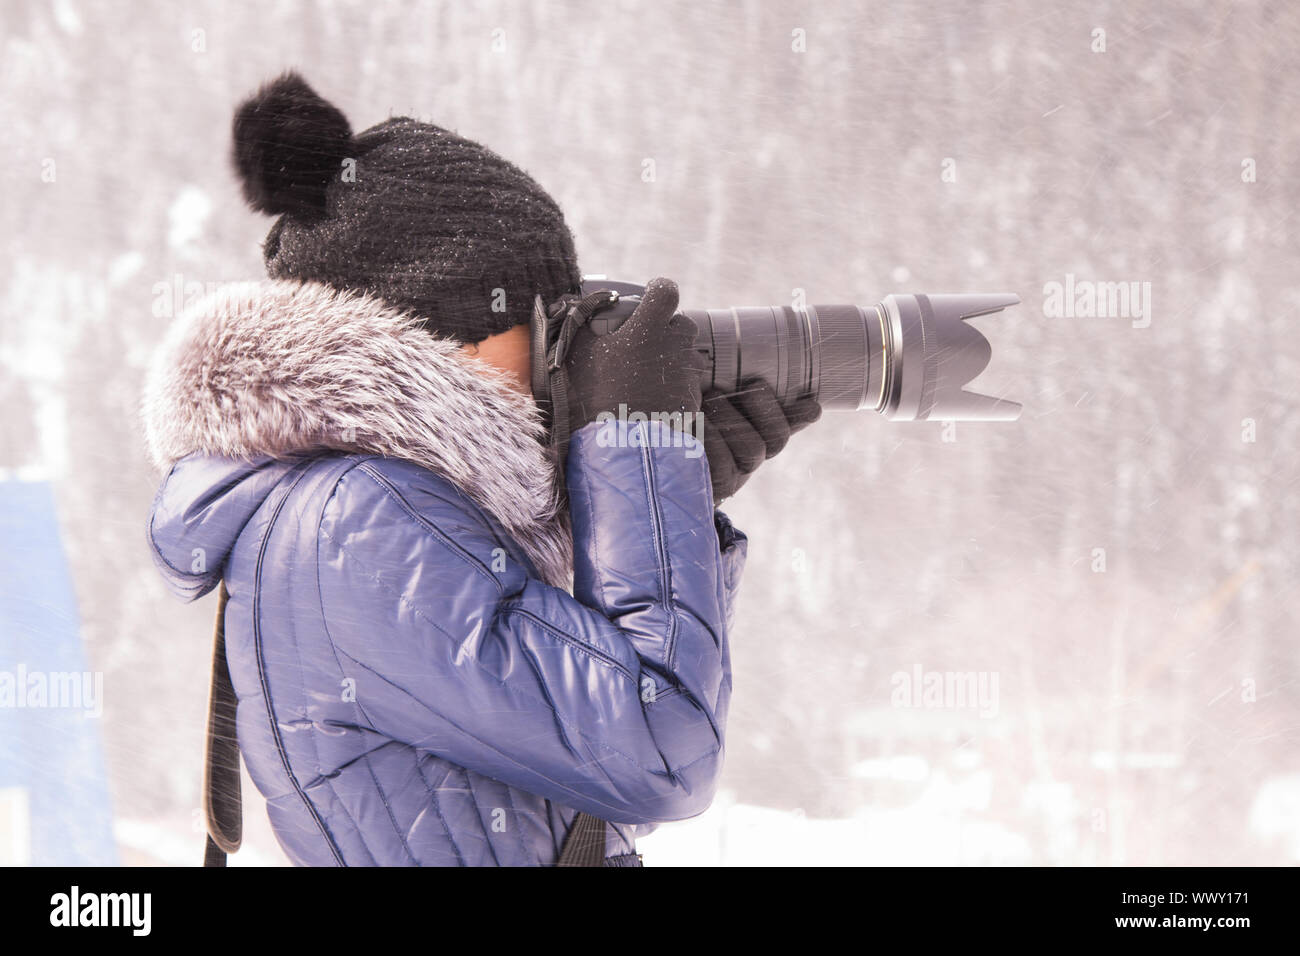 Young girl photographed in the winter in a snow storm on a SLR camera with telephoto lens Stock Photo